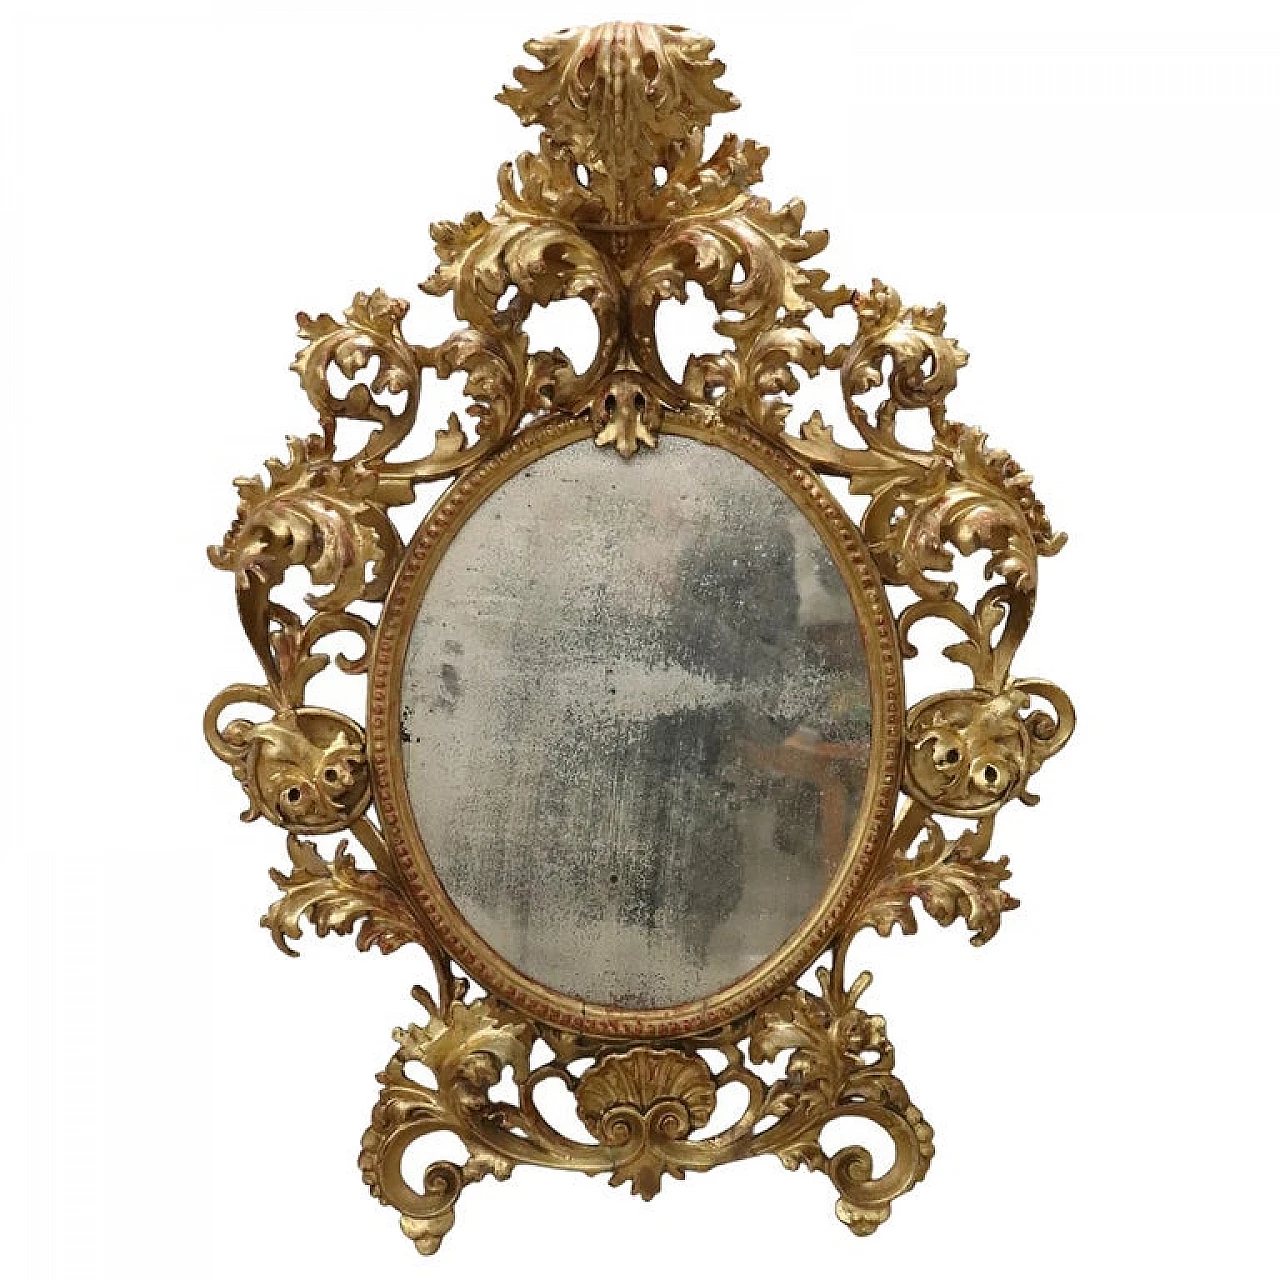 Cartoccio mirror in carved and gilded wood, 18th century 1